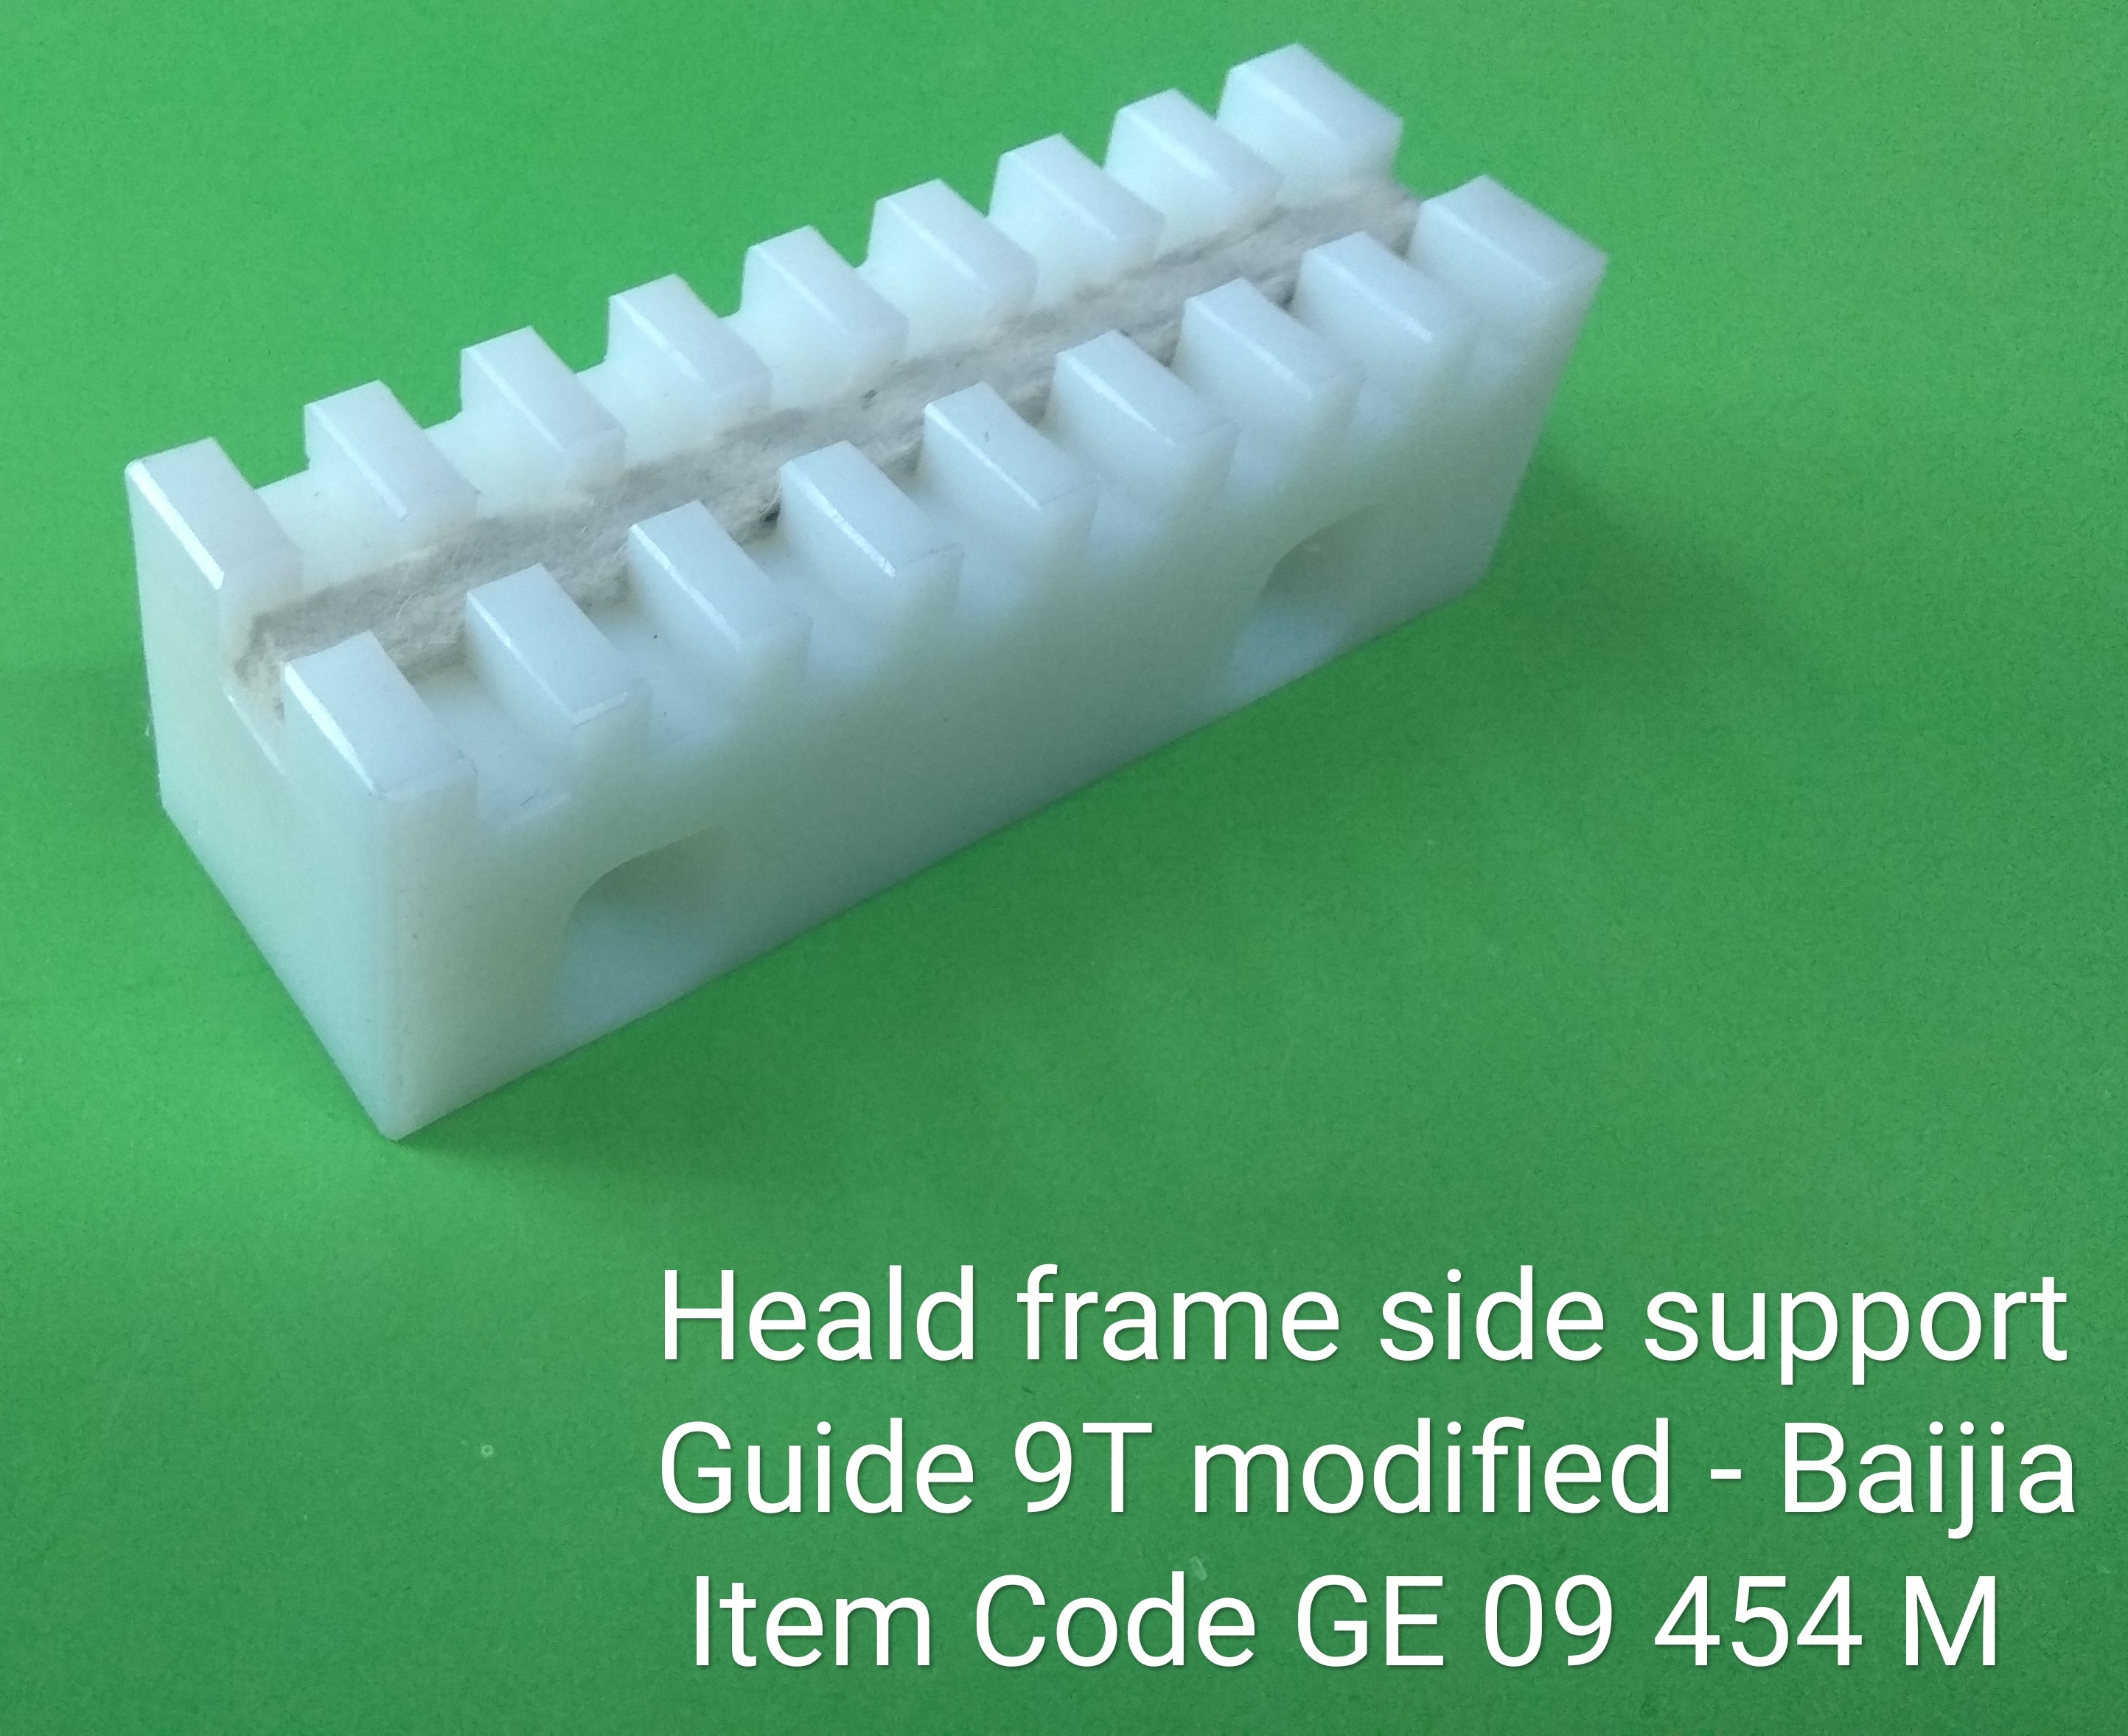 GE_09_454M_Heald_Frame_Side_Support_Guide_9T_modified_1_12.jpg